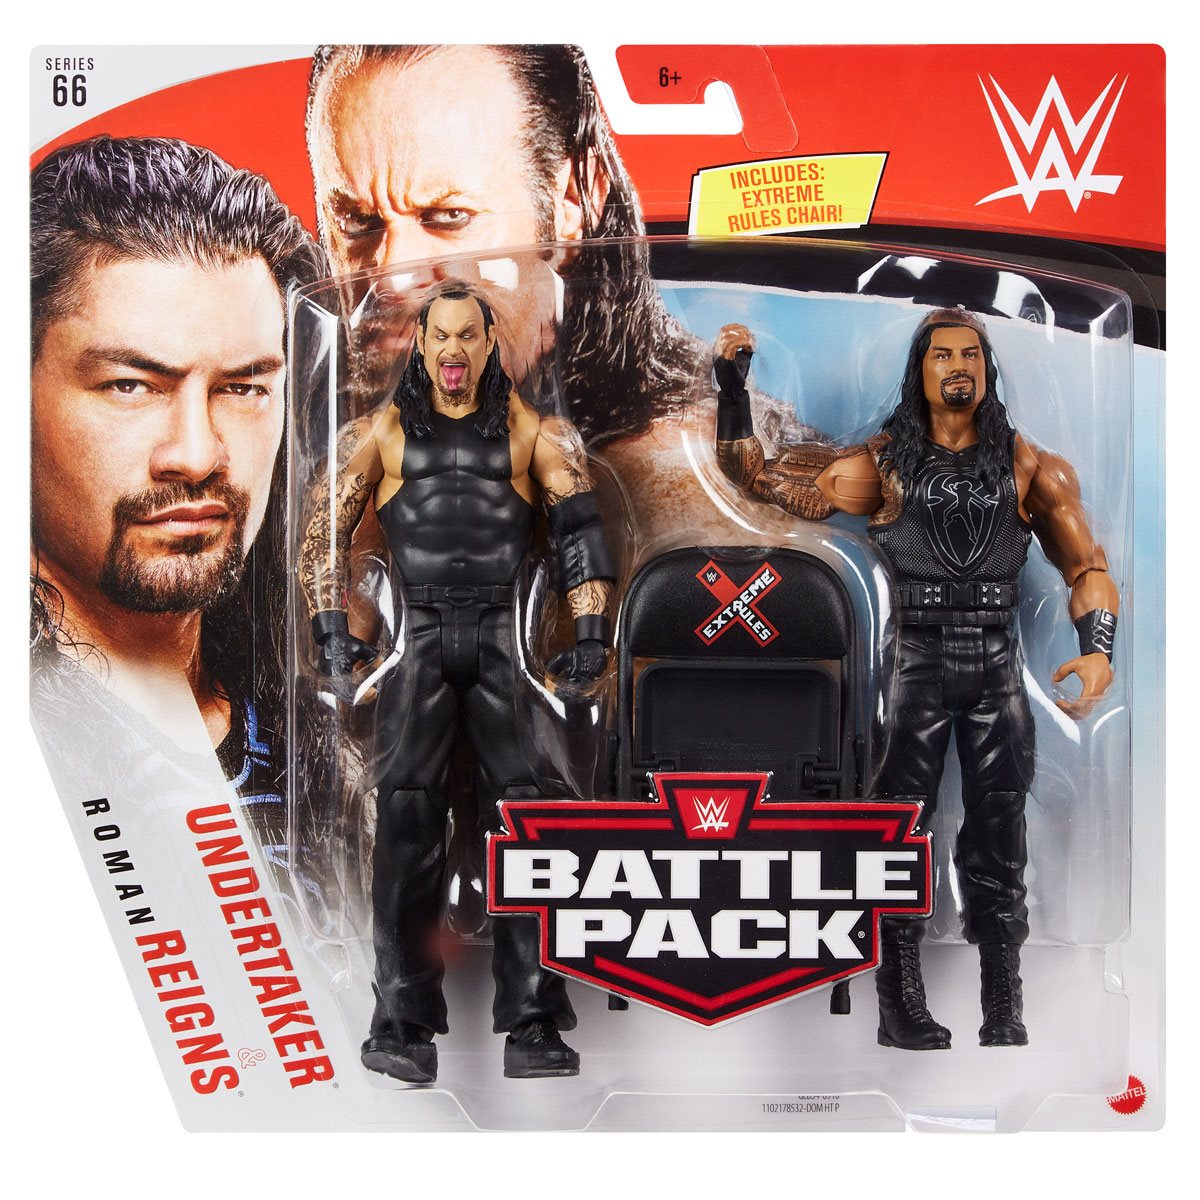 Wwe Roman Reigns And Undertaker Basic Series 66 Action Figure 2 Pack